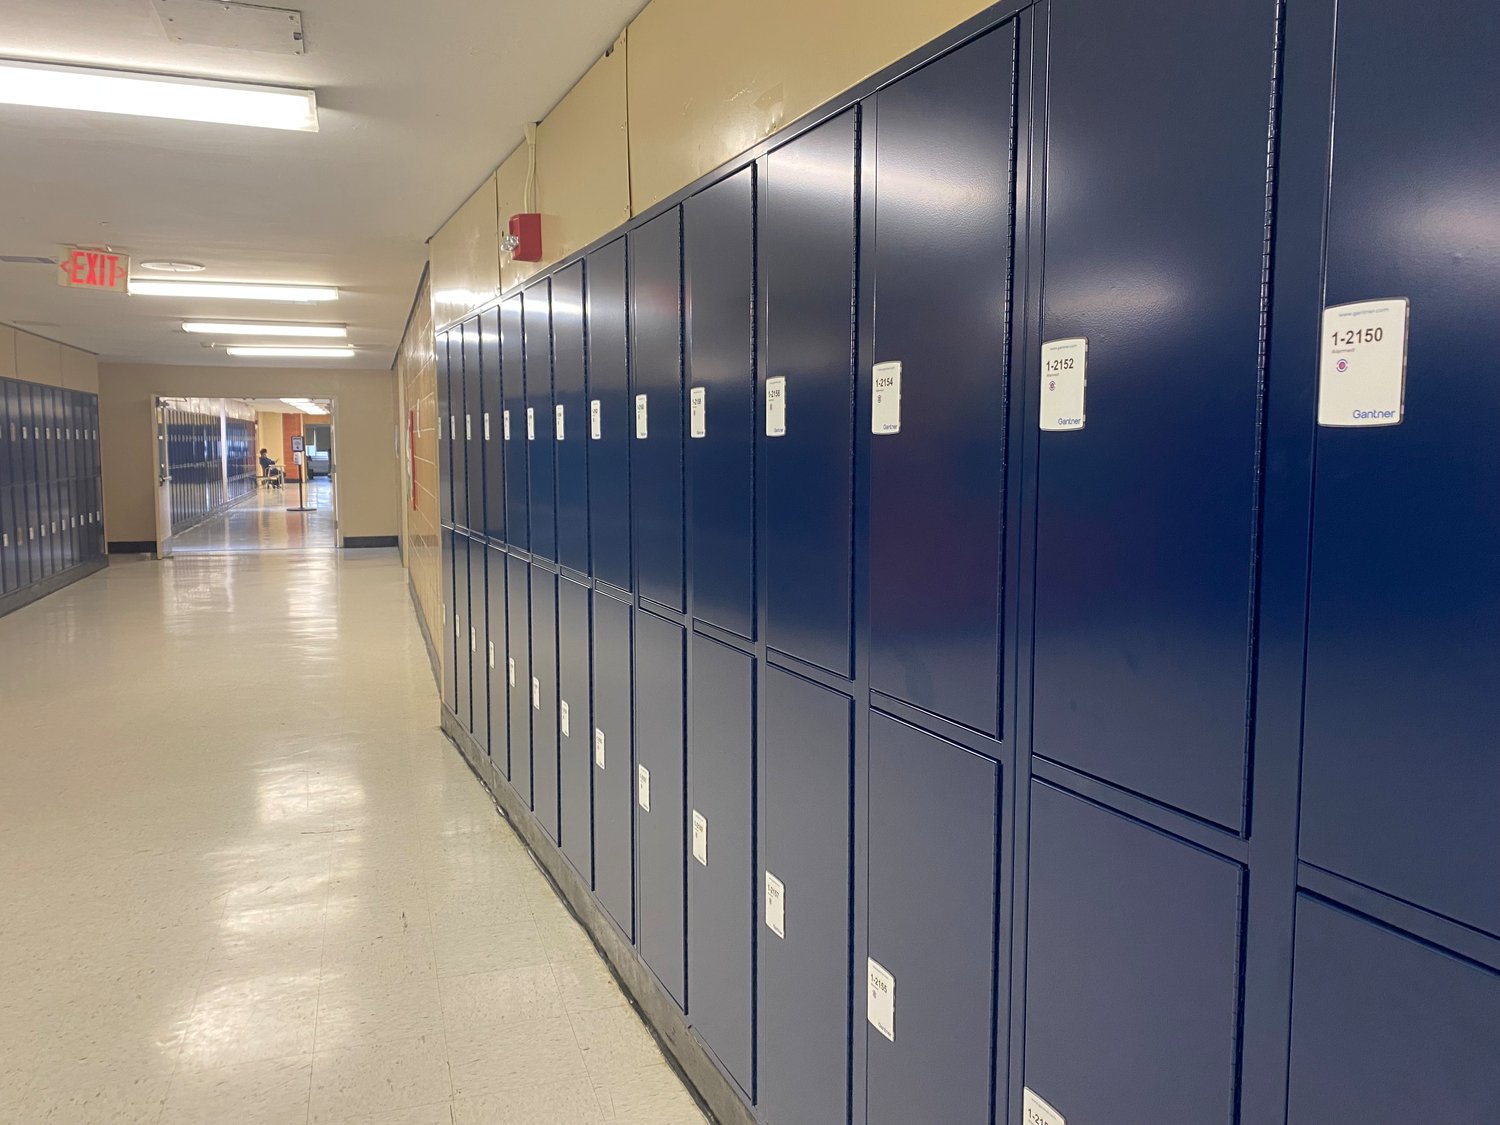 The Baldwin school district announced the completion of newly installed smart lockers for students to use throughout the Baldwin School High School.